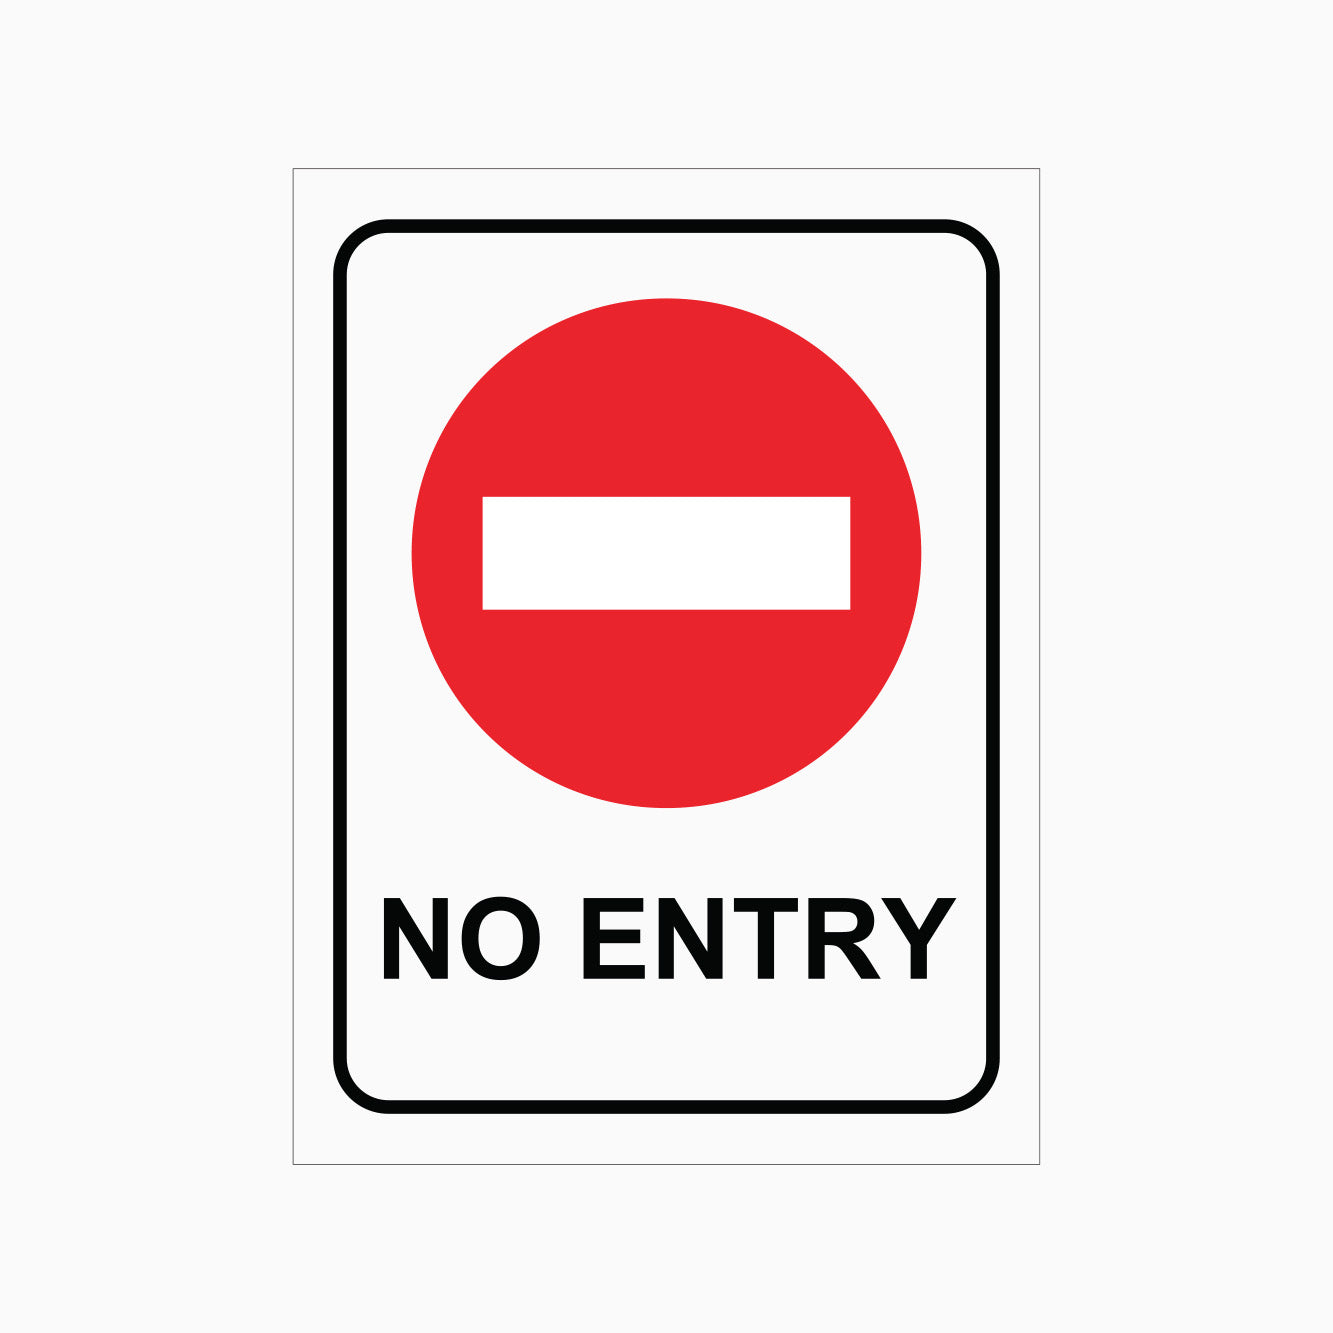 NO ENTRY SIGN - PROHIBITION SIGN - STOP SIGN